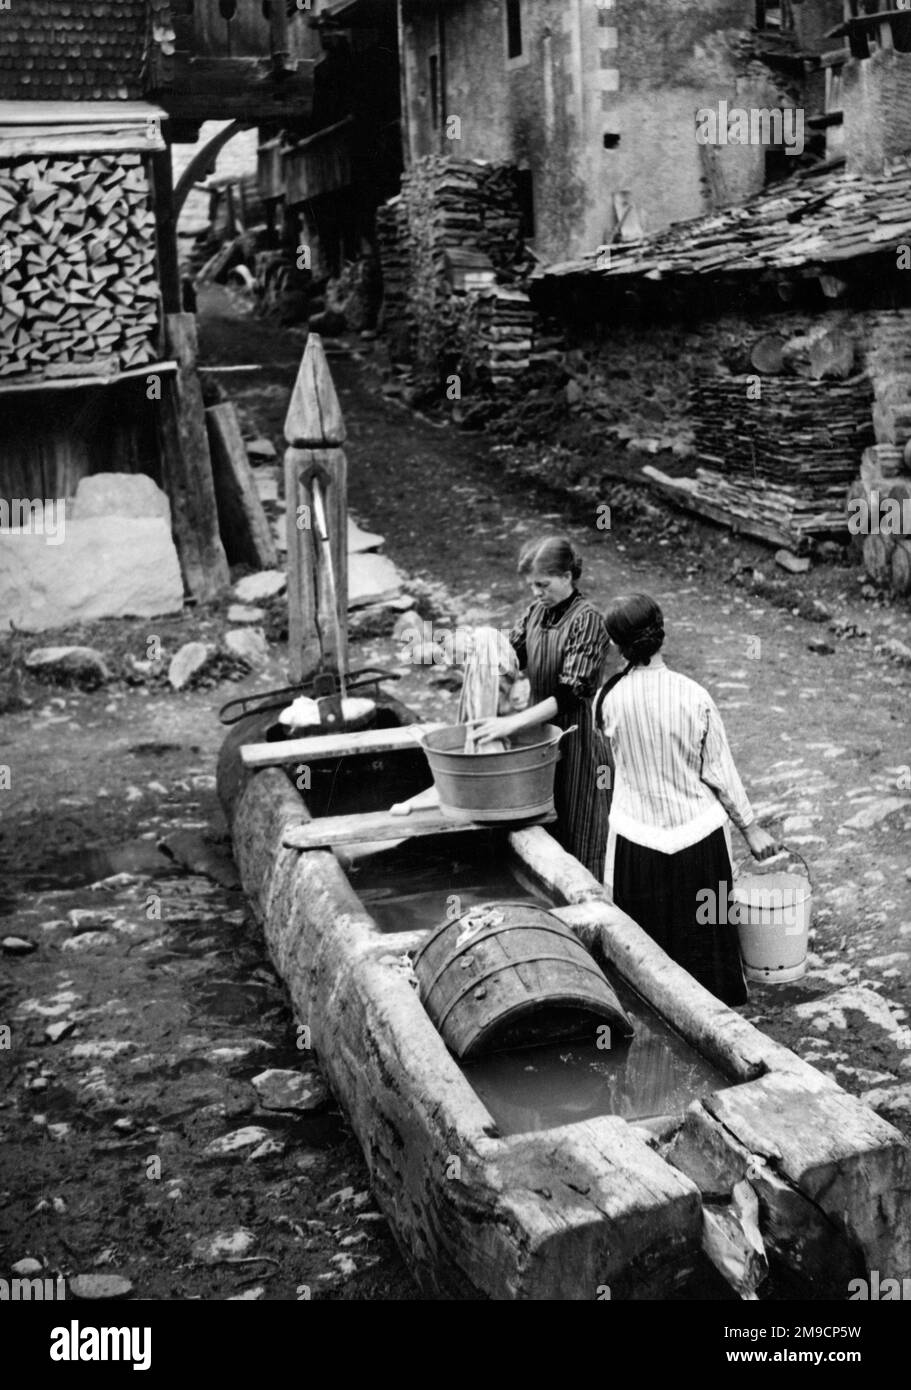 Kippel, Switzerland - Water Troughs. Water supply for the village is provided by hollowed-out tree trunks of the local larches. Despite severe winters, fresh spring water seldom freezes. Villagers do their laundry and scrub out milking utensils in the water troughs. Stock Photo